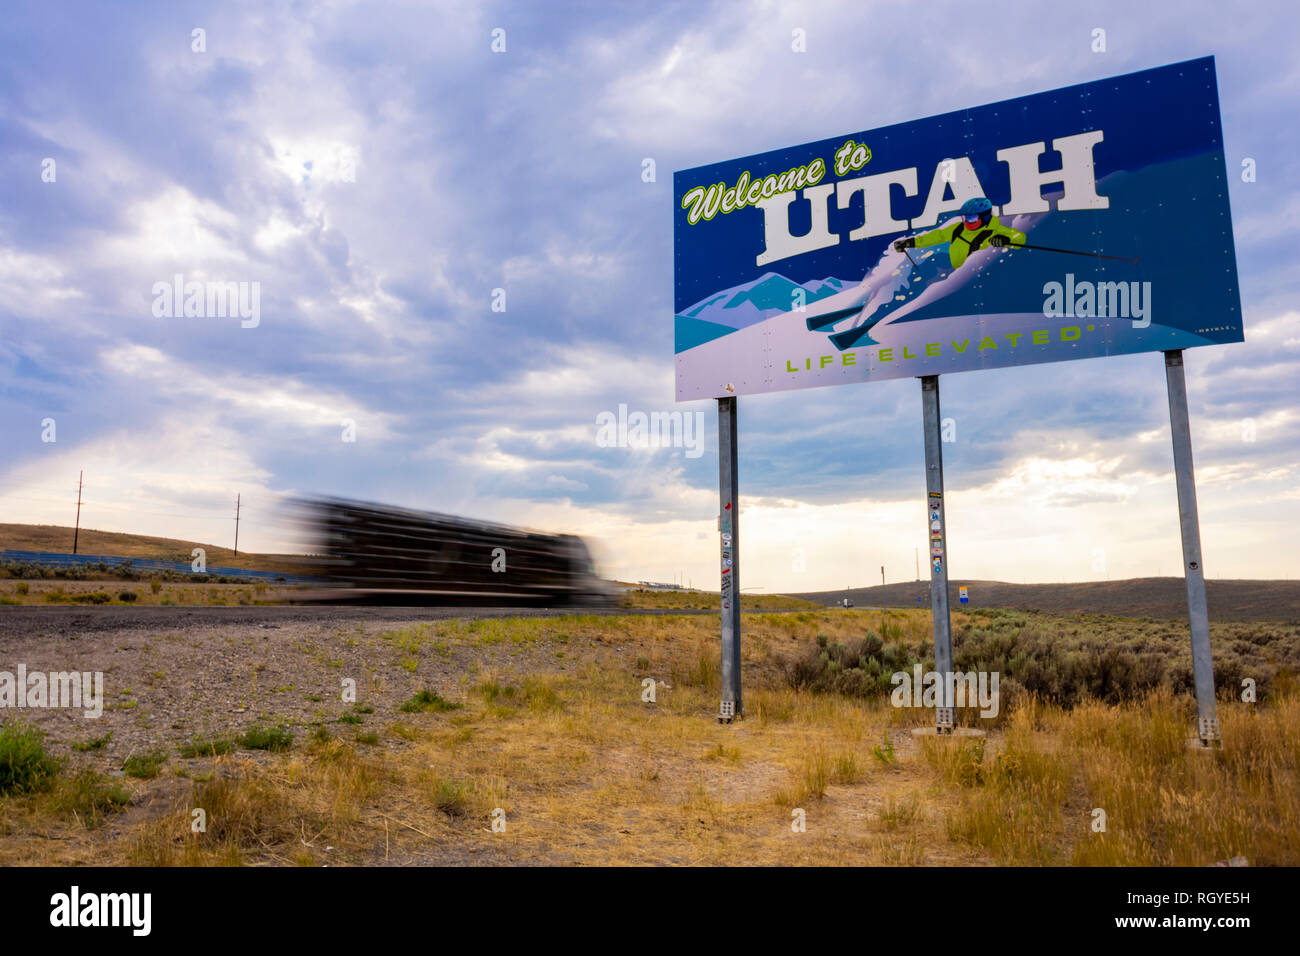 Evanston, Utah, United States - August 15, 2018: Shot of a truck driving by the Welcome to Utah sign located on the interstate highway I-80 in Evansto Stock Photo